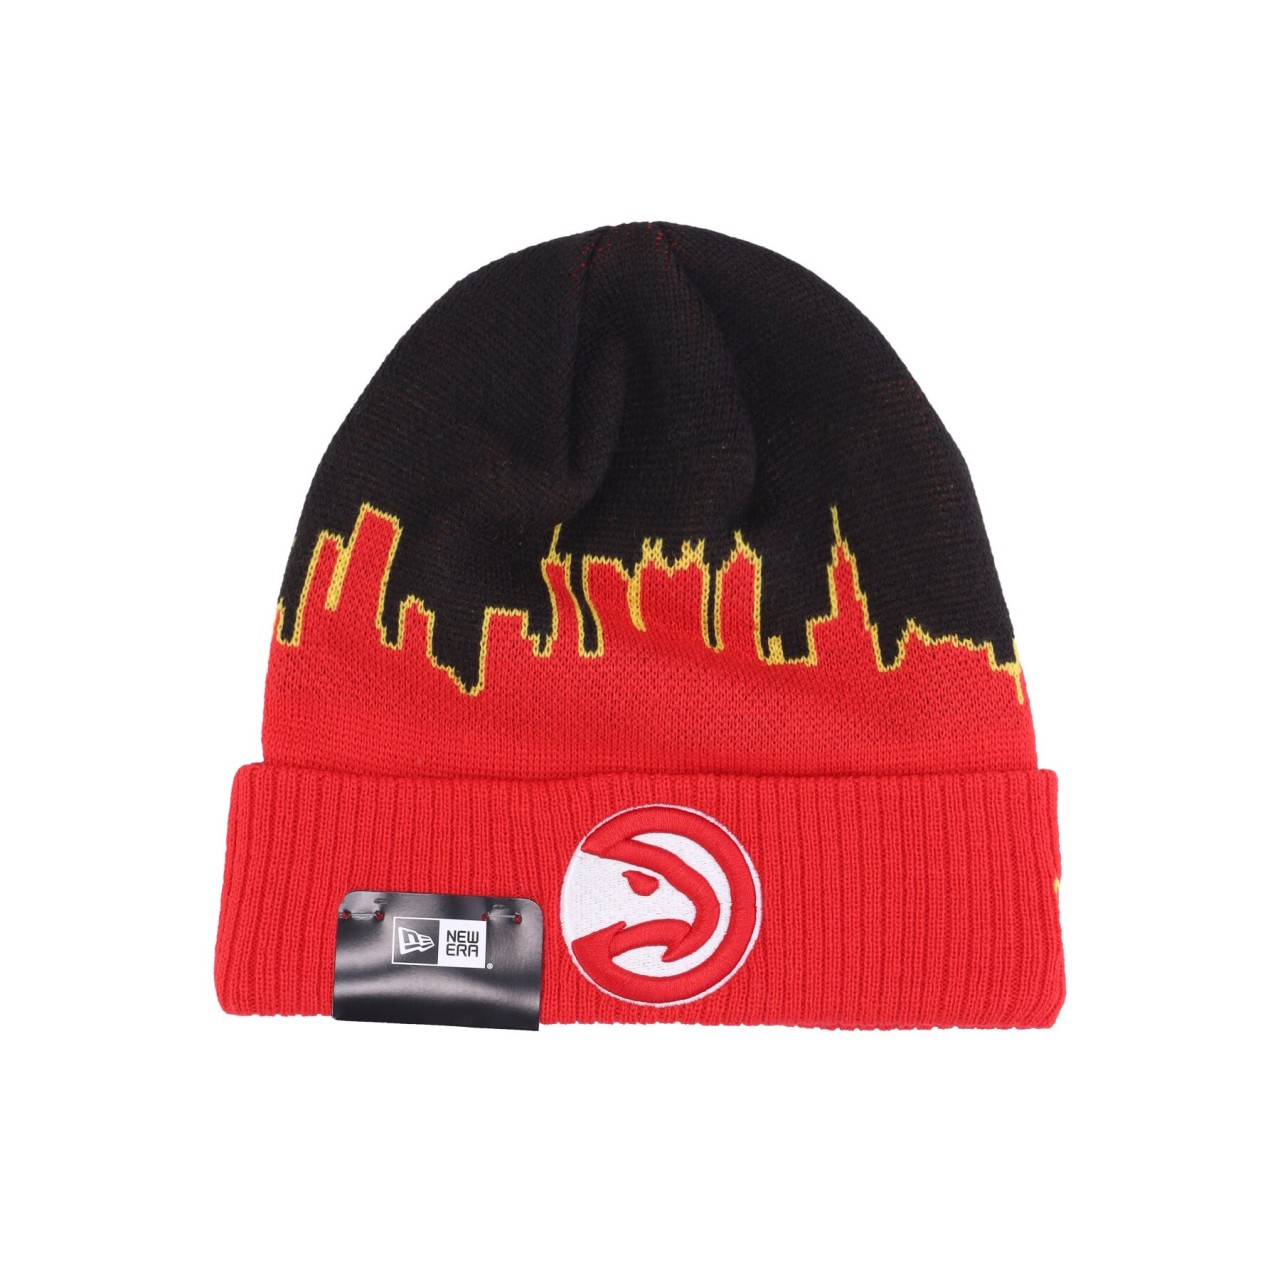 NEW ERA NBA TIP OFF KNIT ATLHAW 60289650